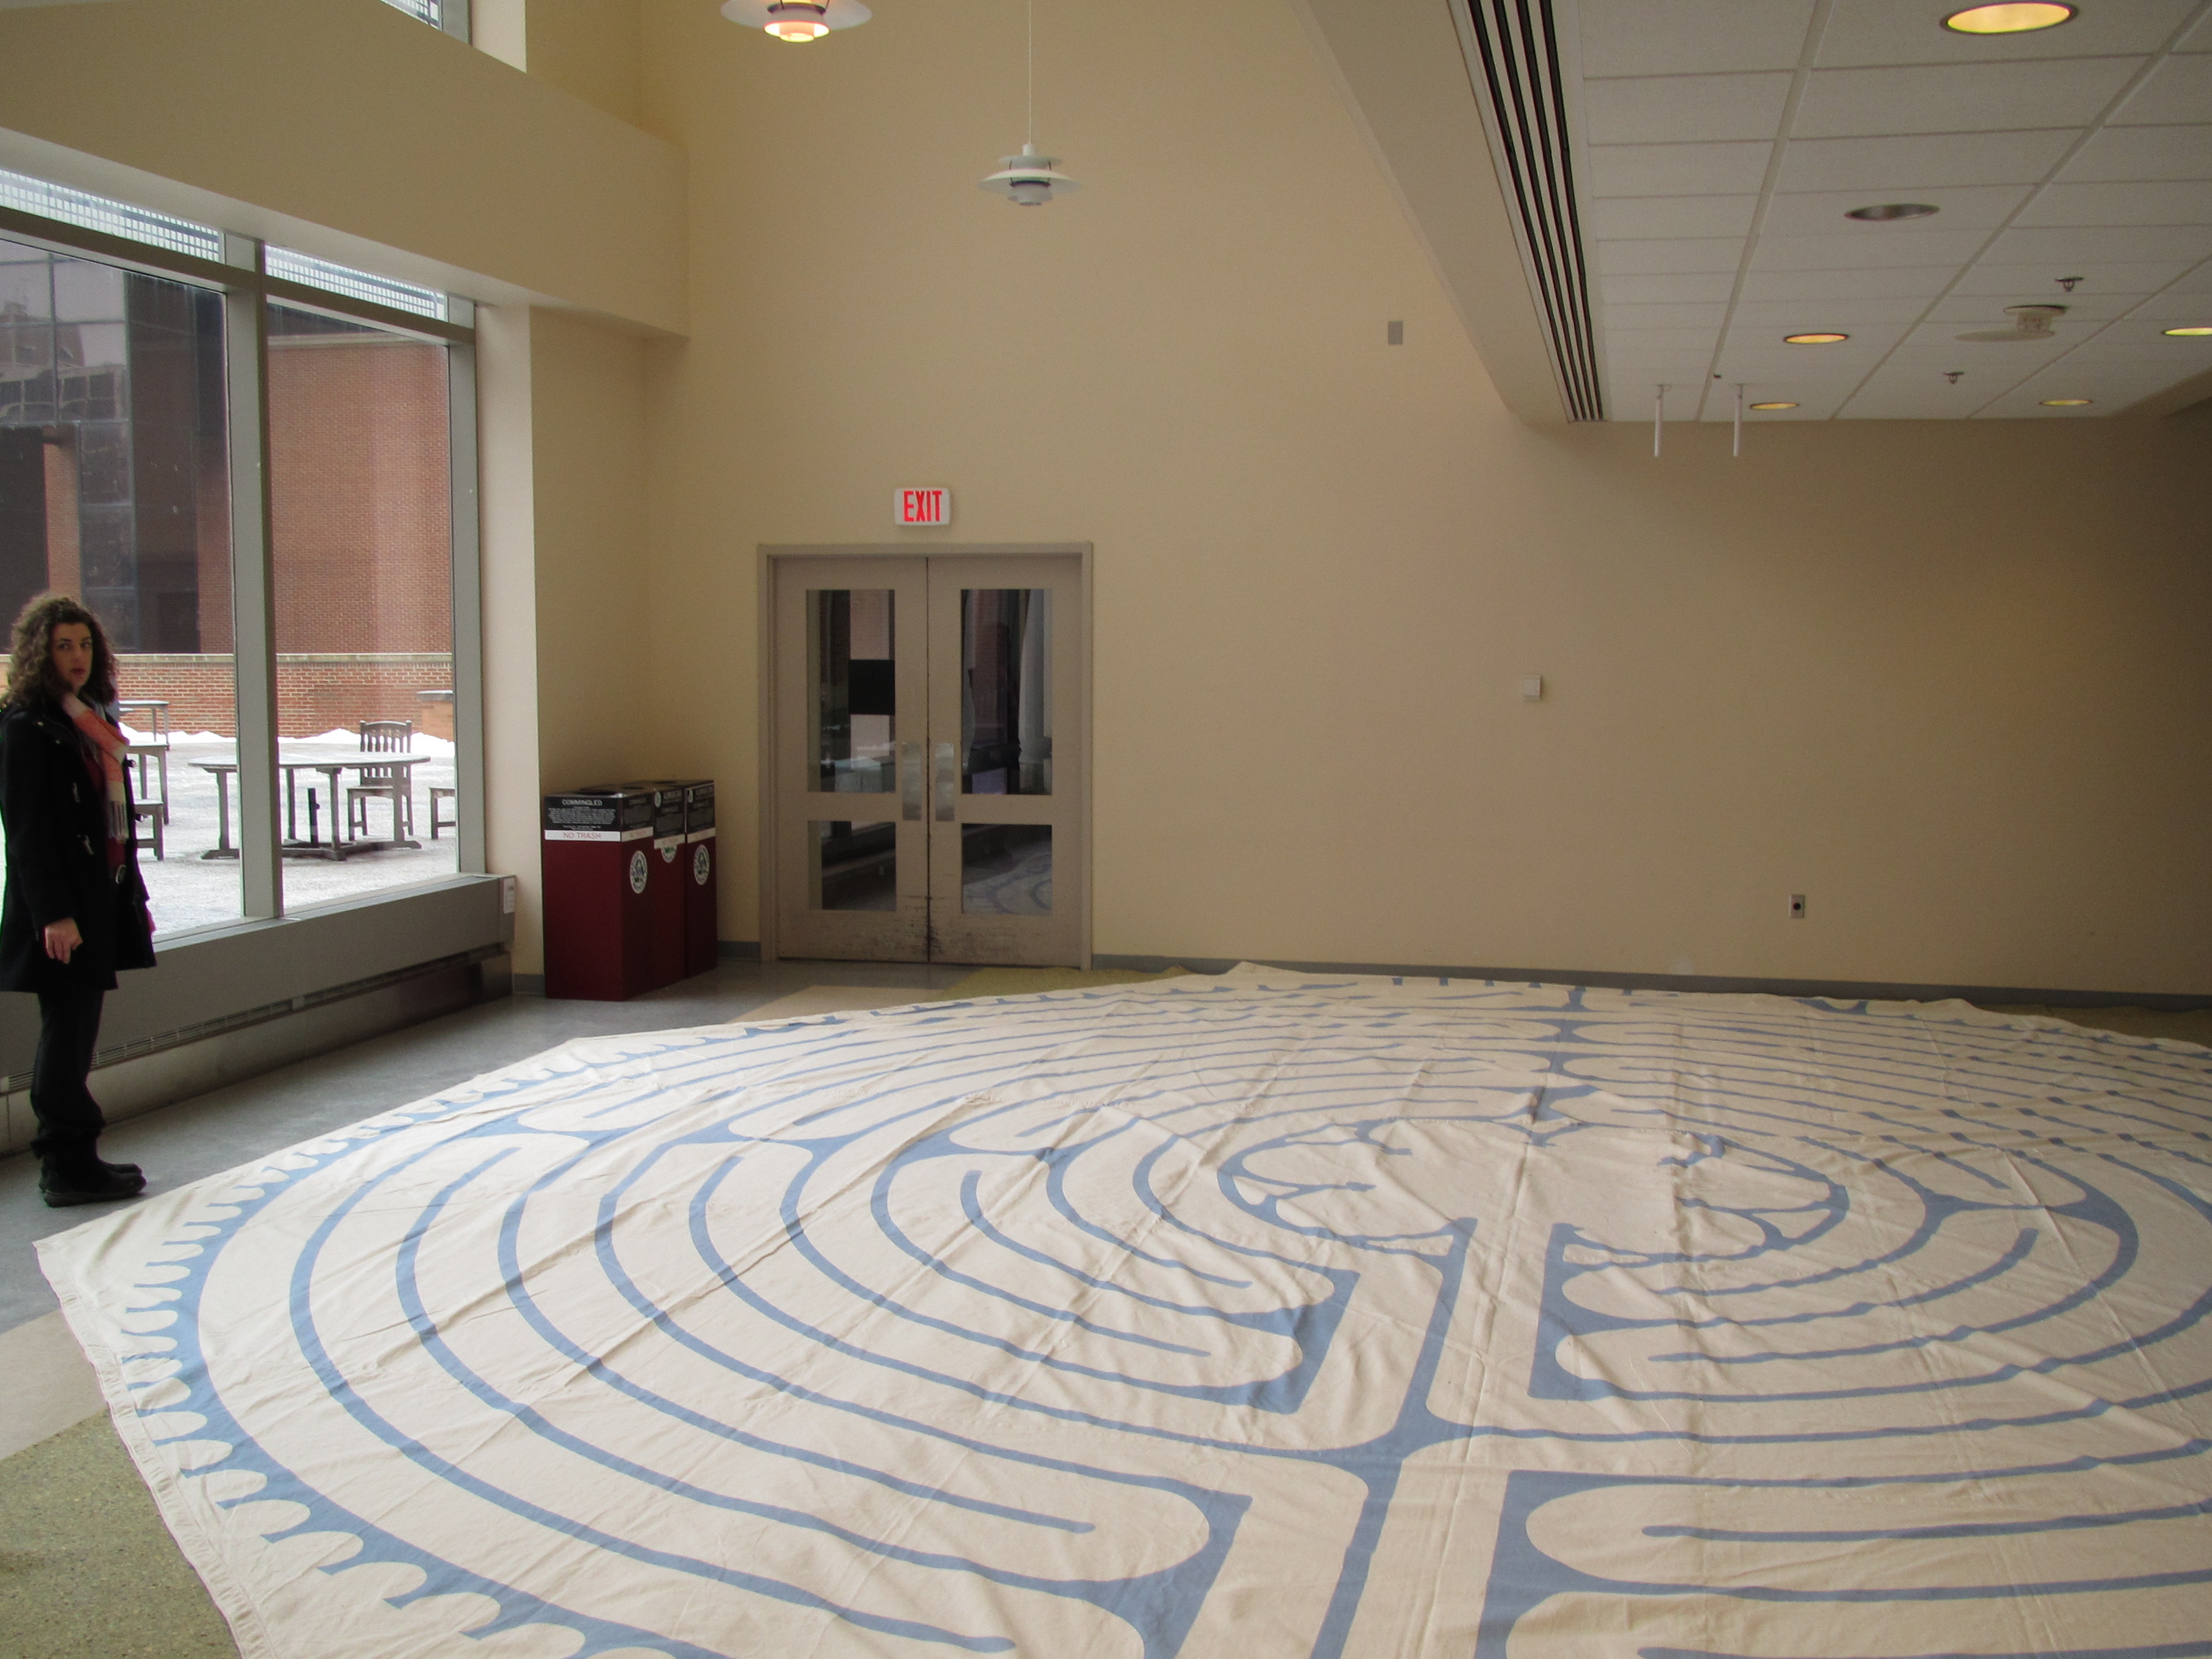 Labyrinth at Clinical Center